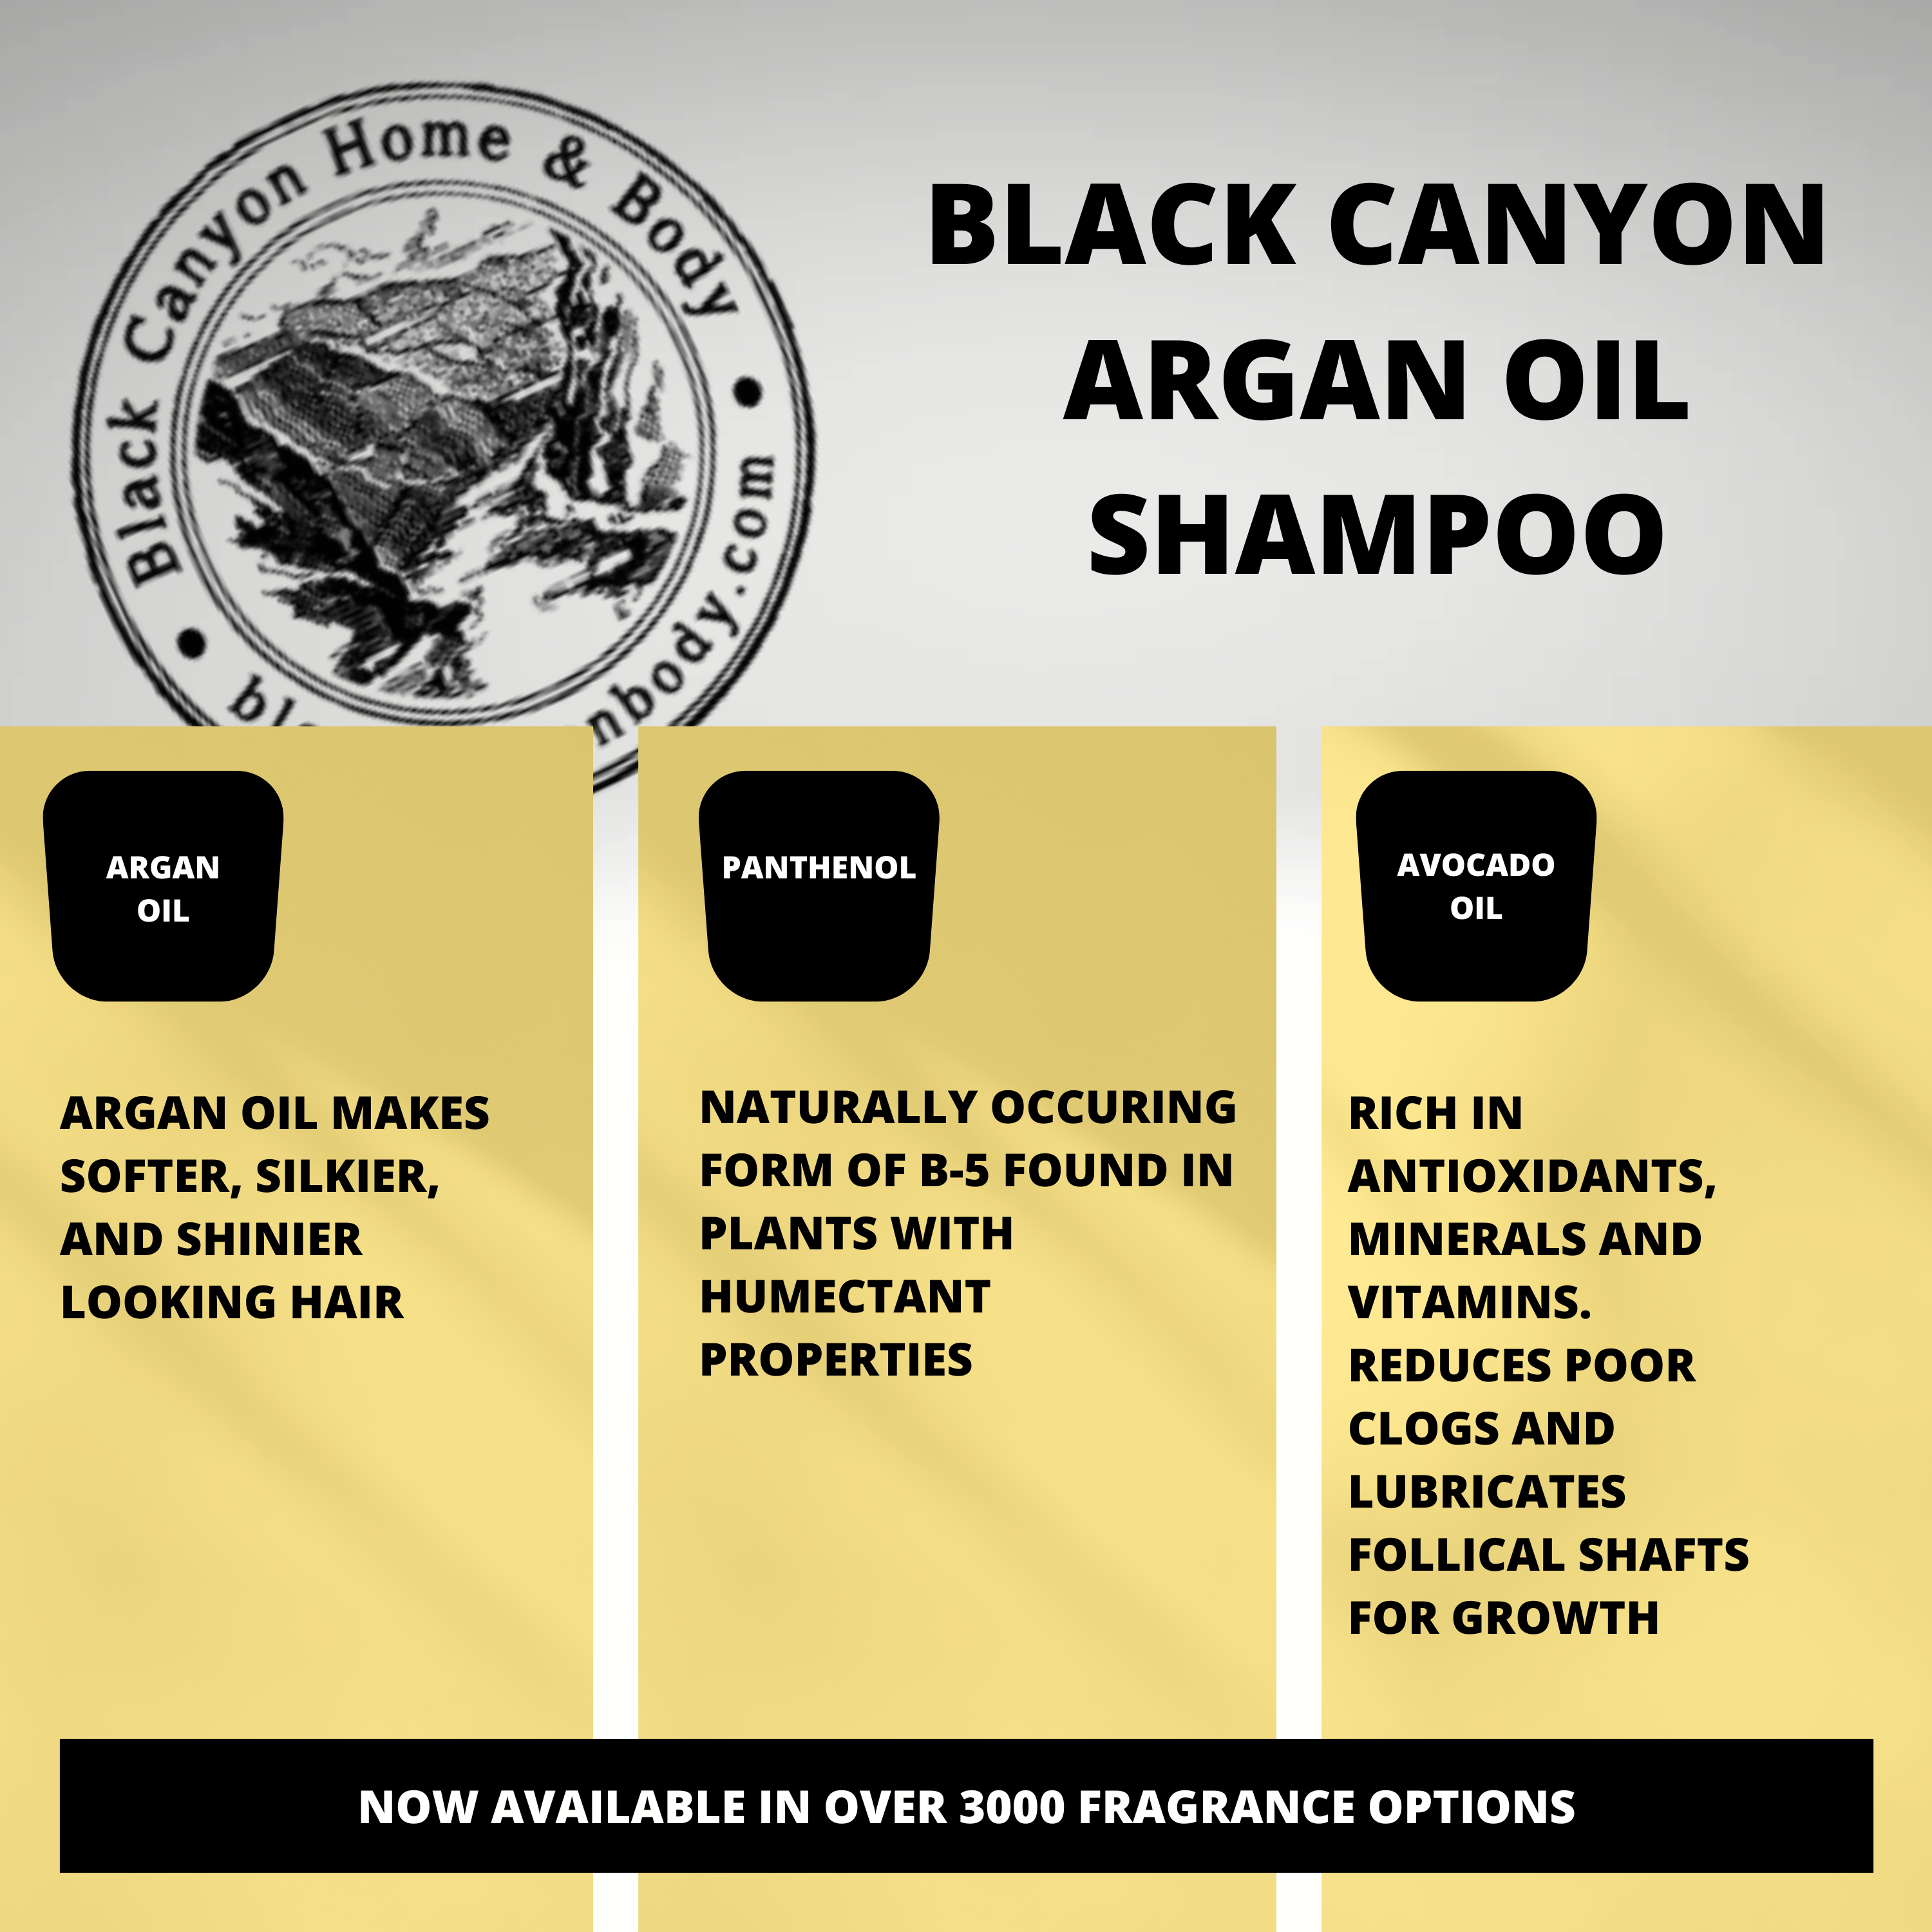 Black Canyon Blackberry & Fir Scented Shampoo with Argan Oil